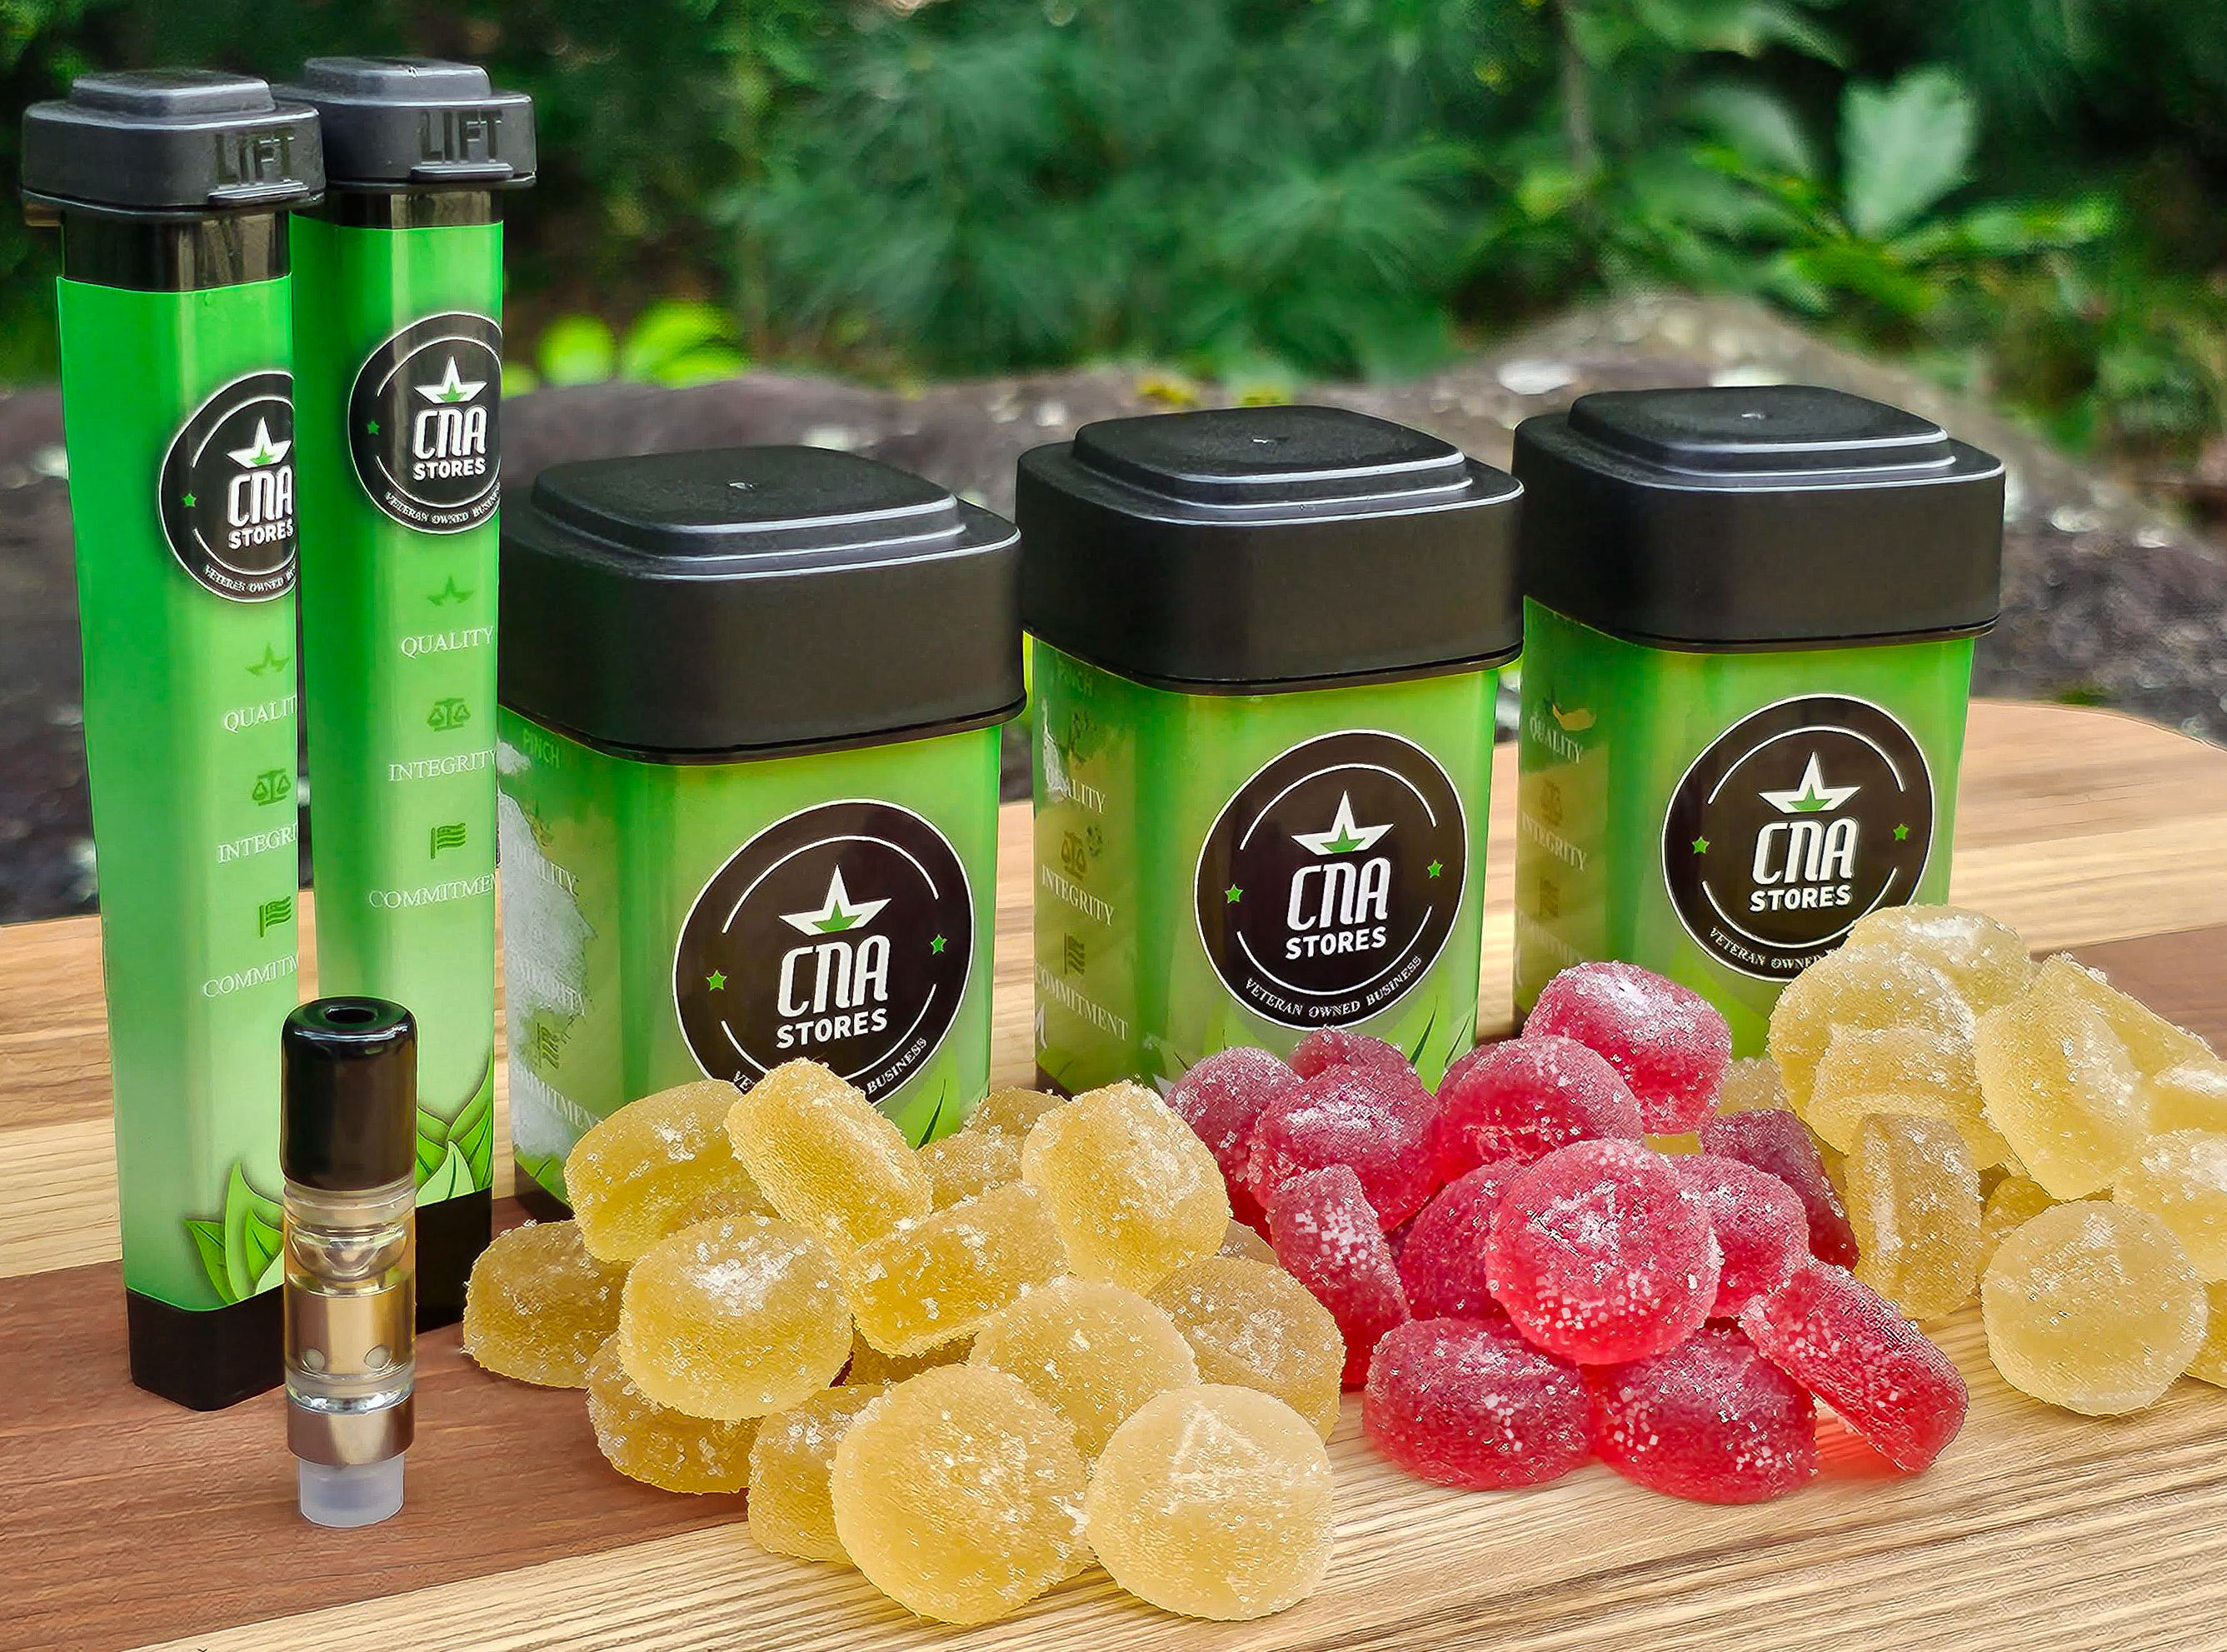 Introducing Our State-of-the-Art Cannabis Cultivation and Limited-Edition Products!